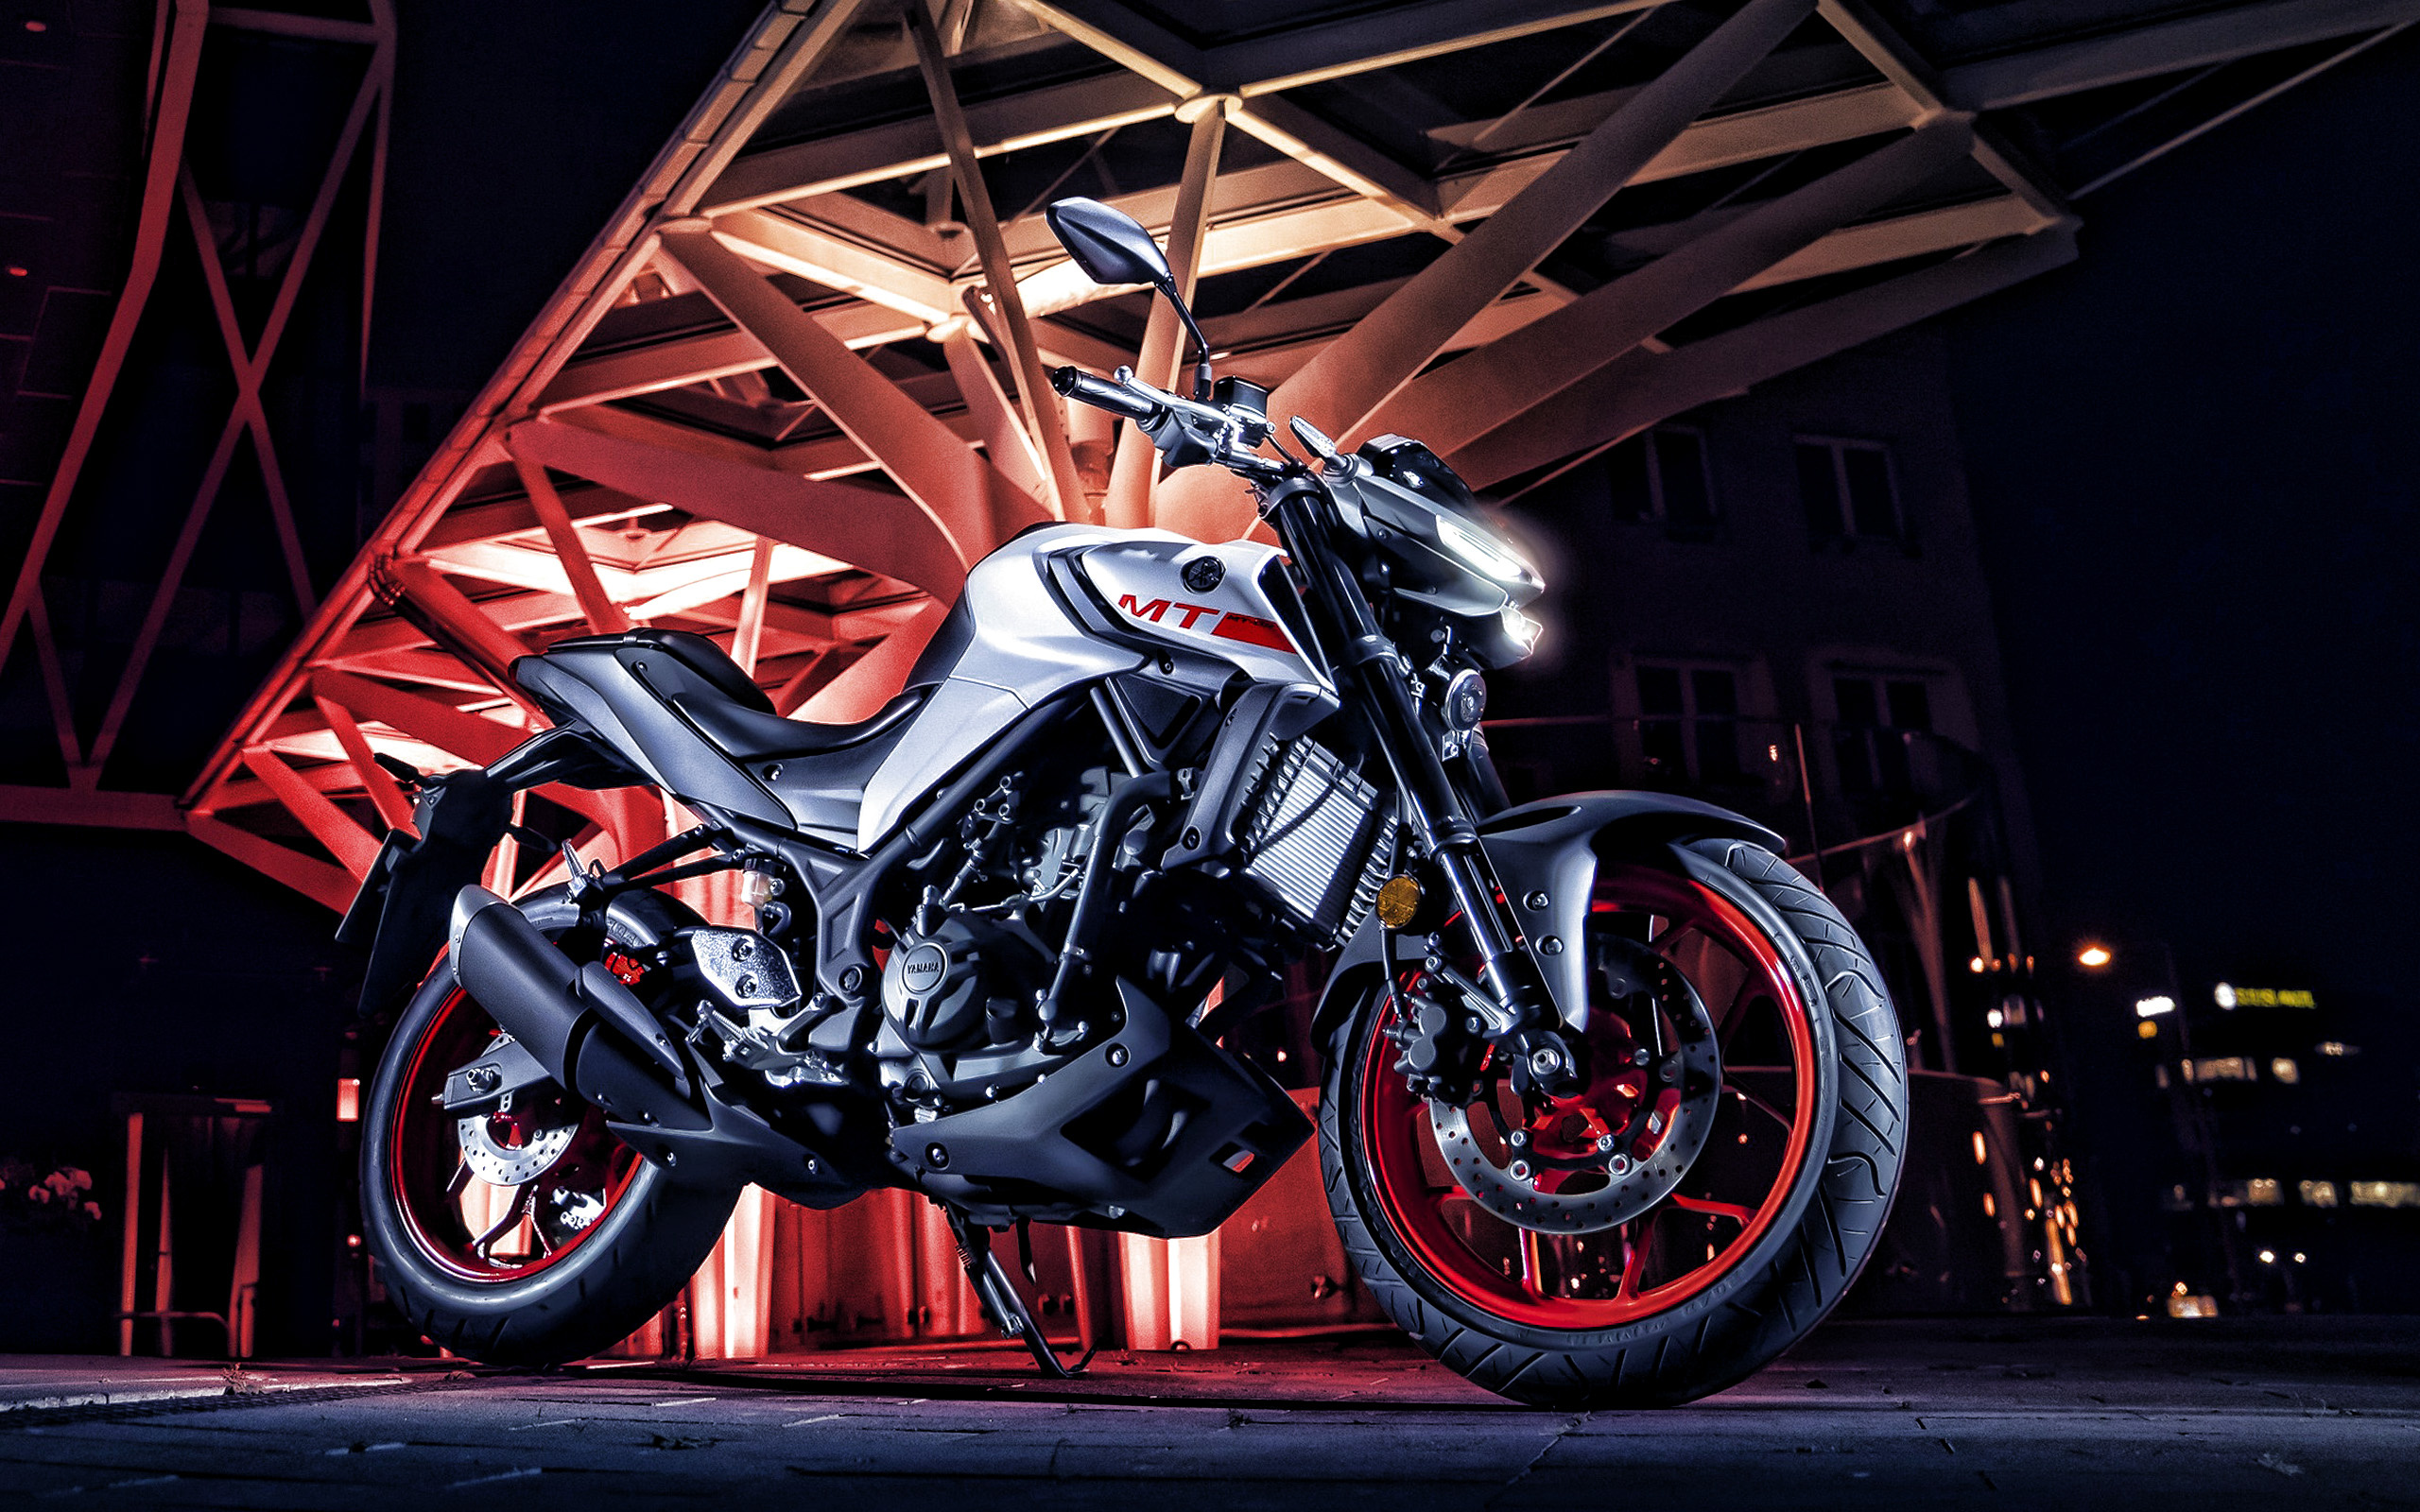 Yamaha MT-03, Ice fluo color, Stunning front view, HD wallpapers, 2560x1600 HD Desktop